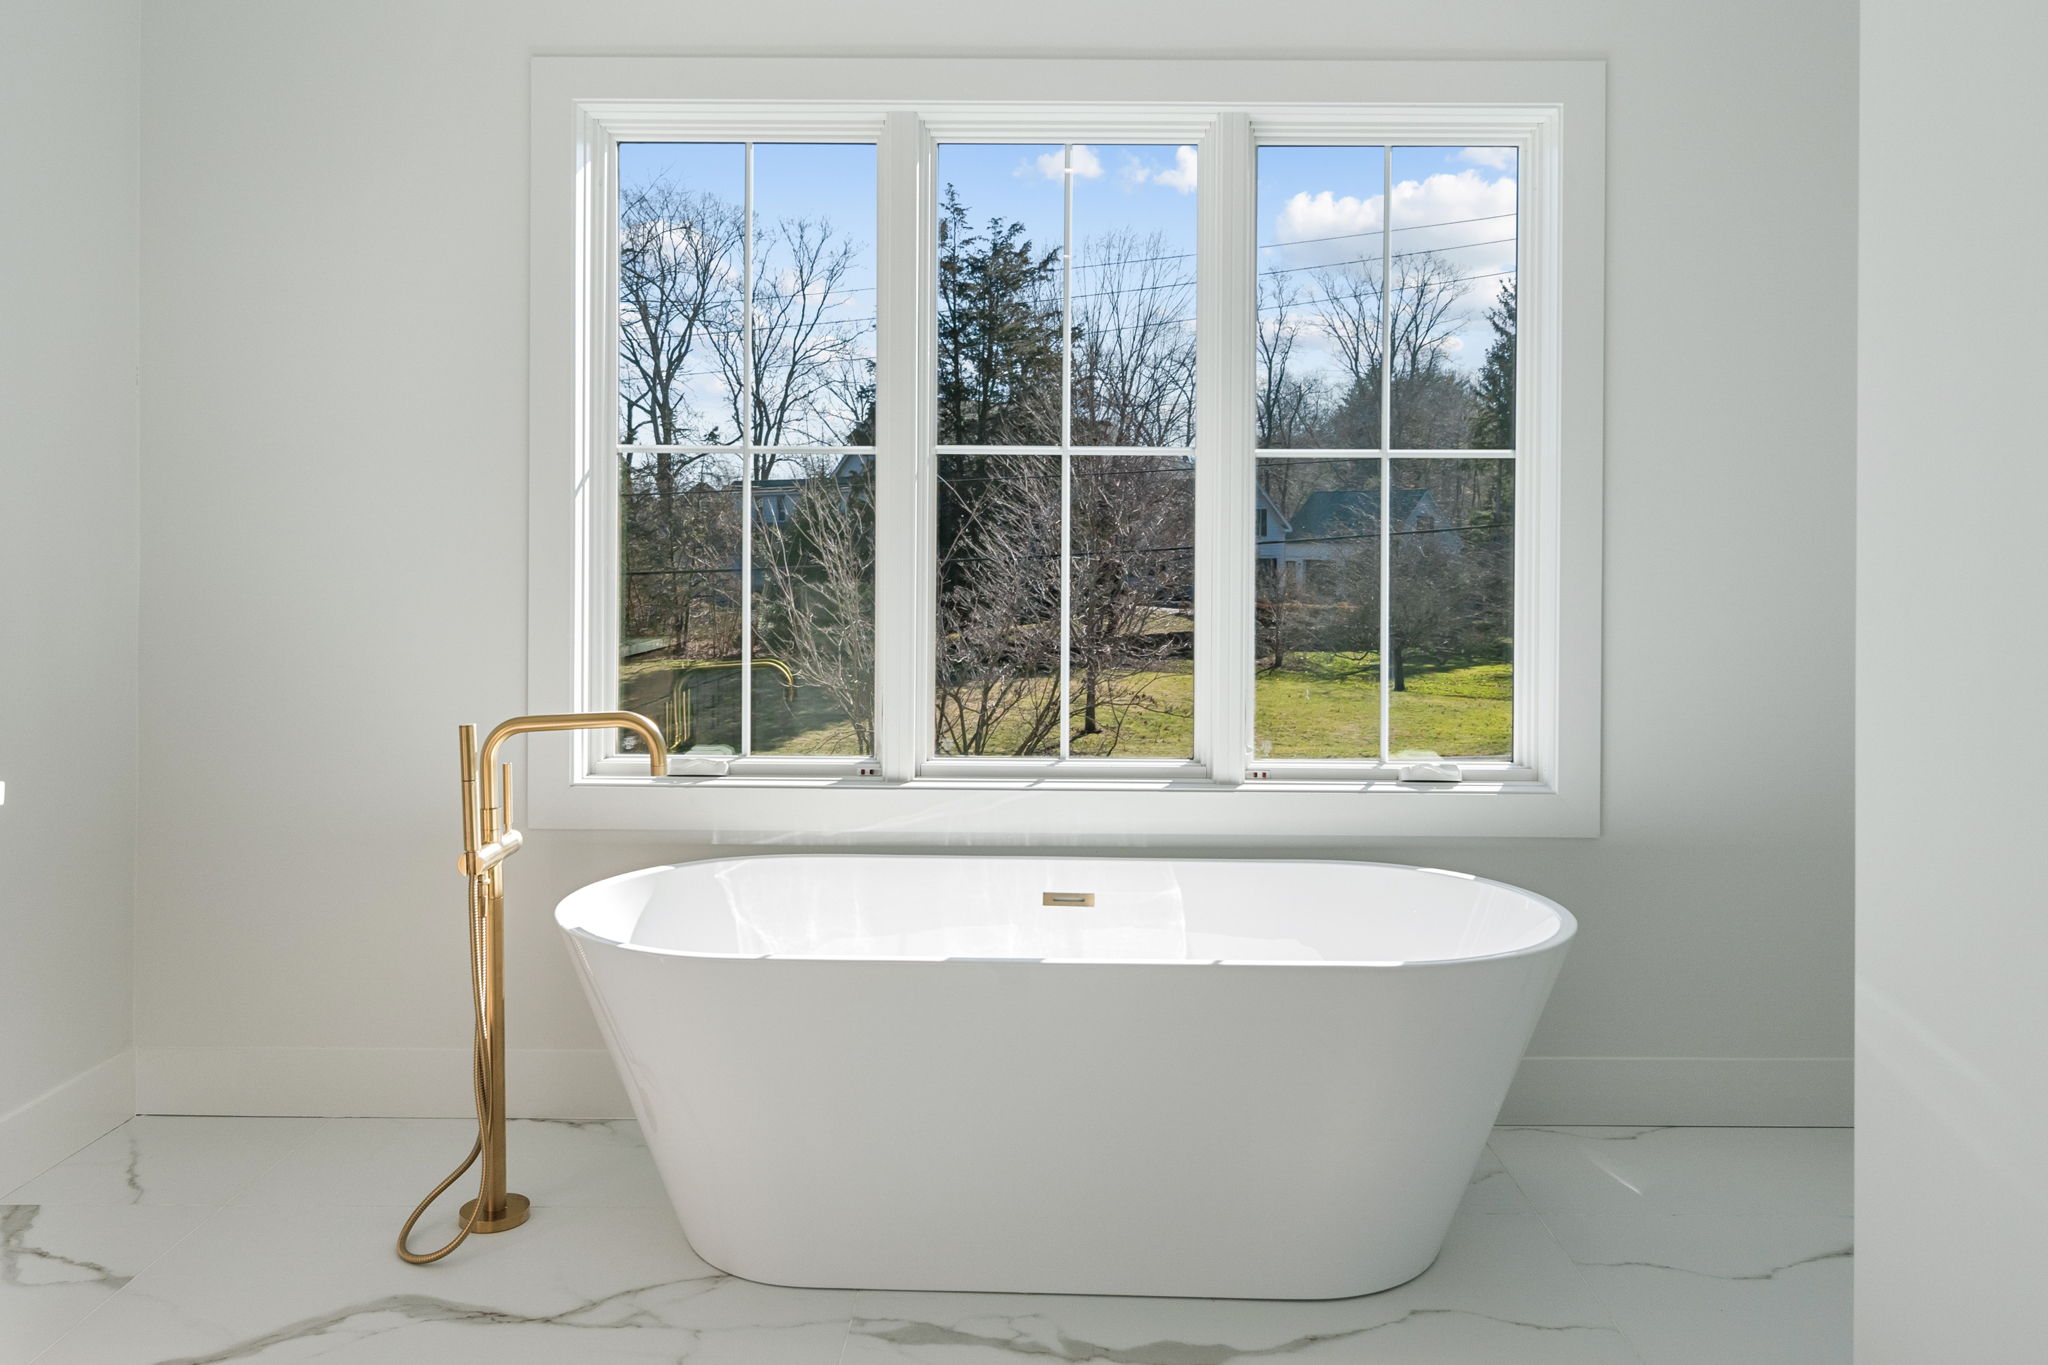 Freestanding soaking tub with waterfall feature and handheld shower